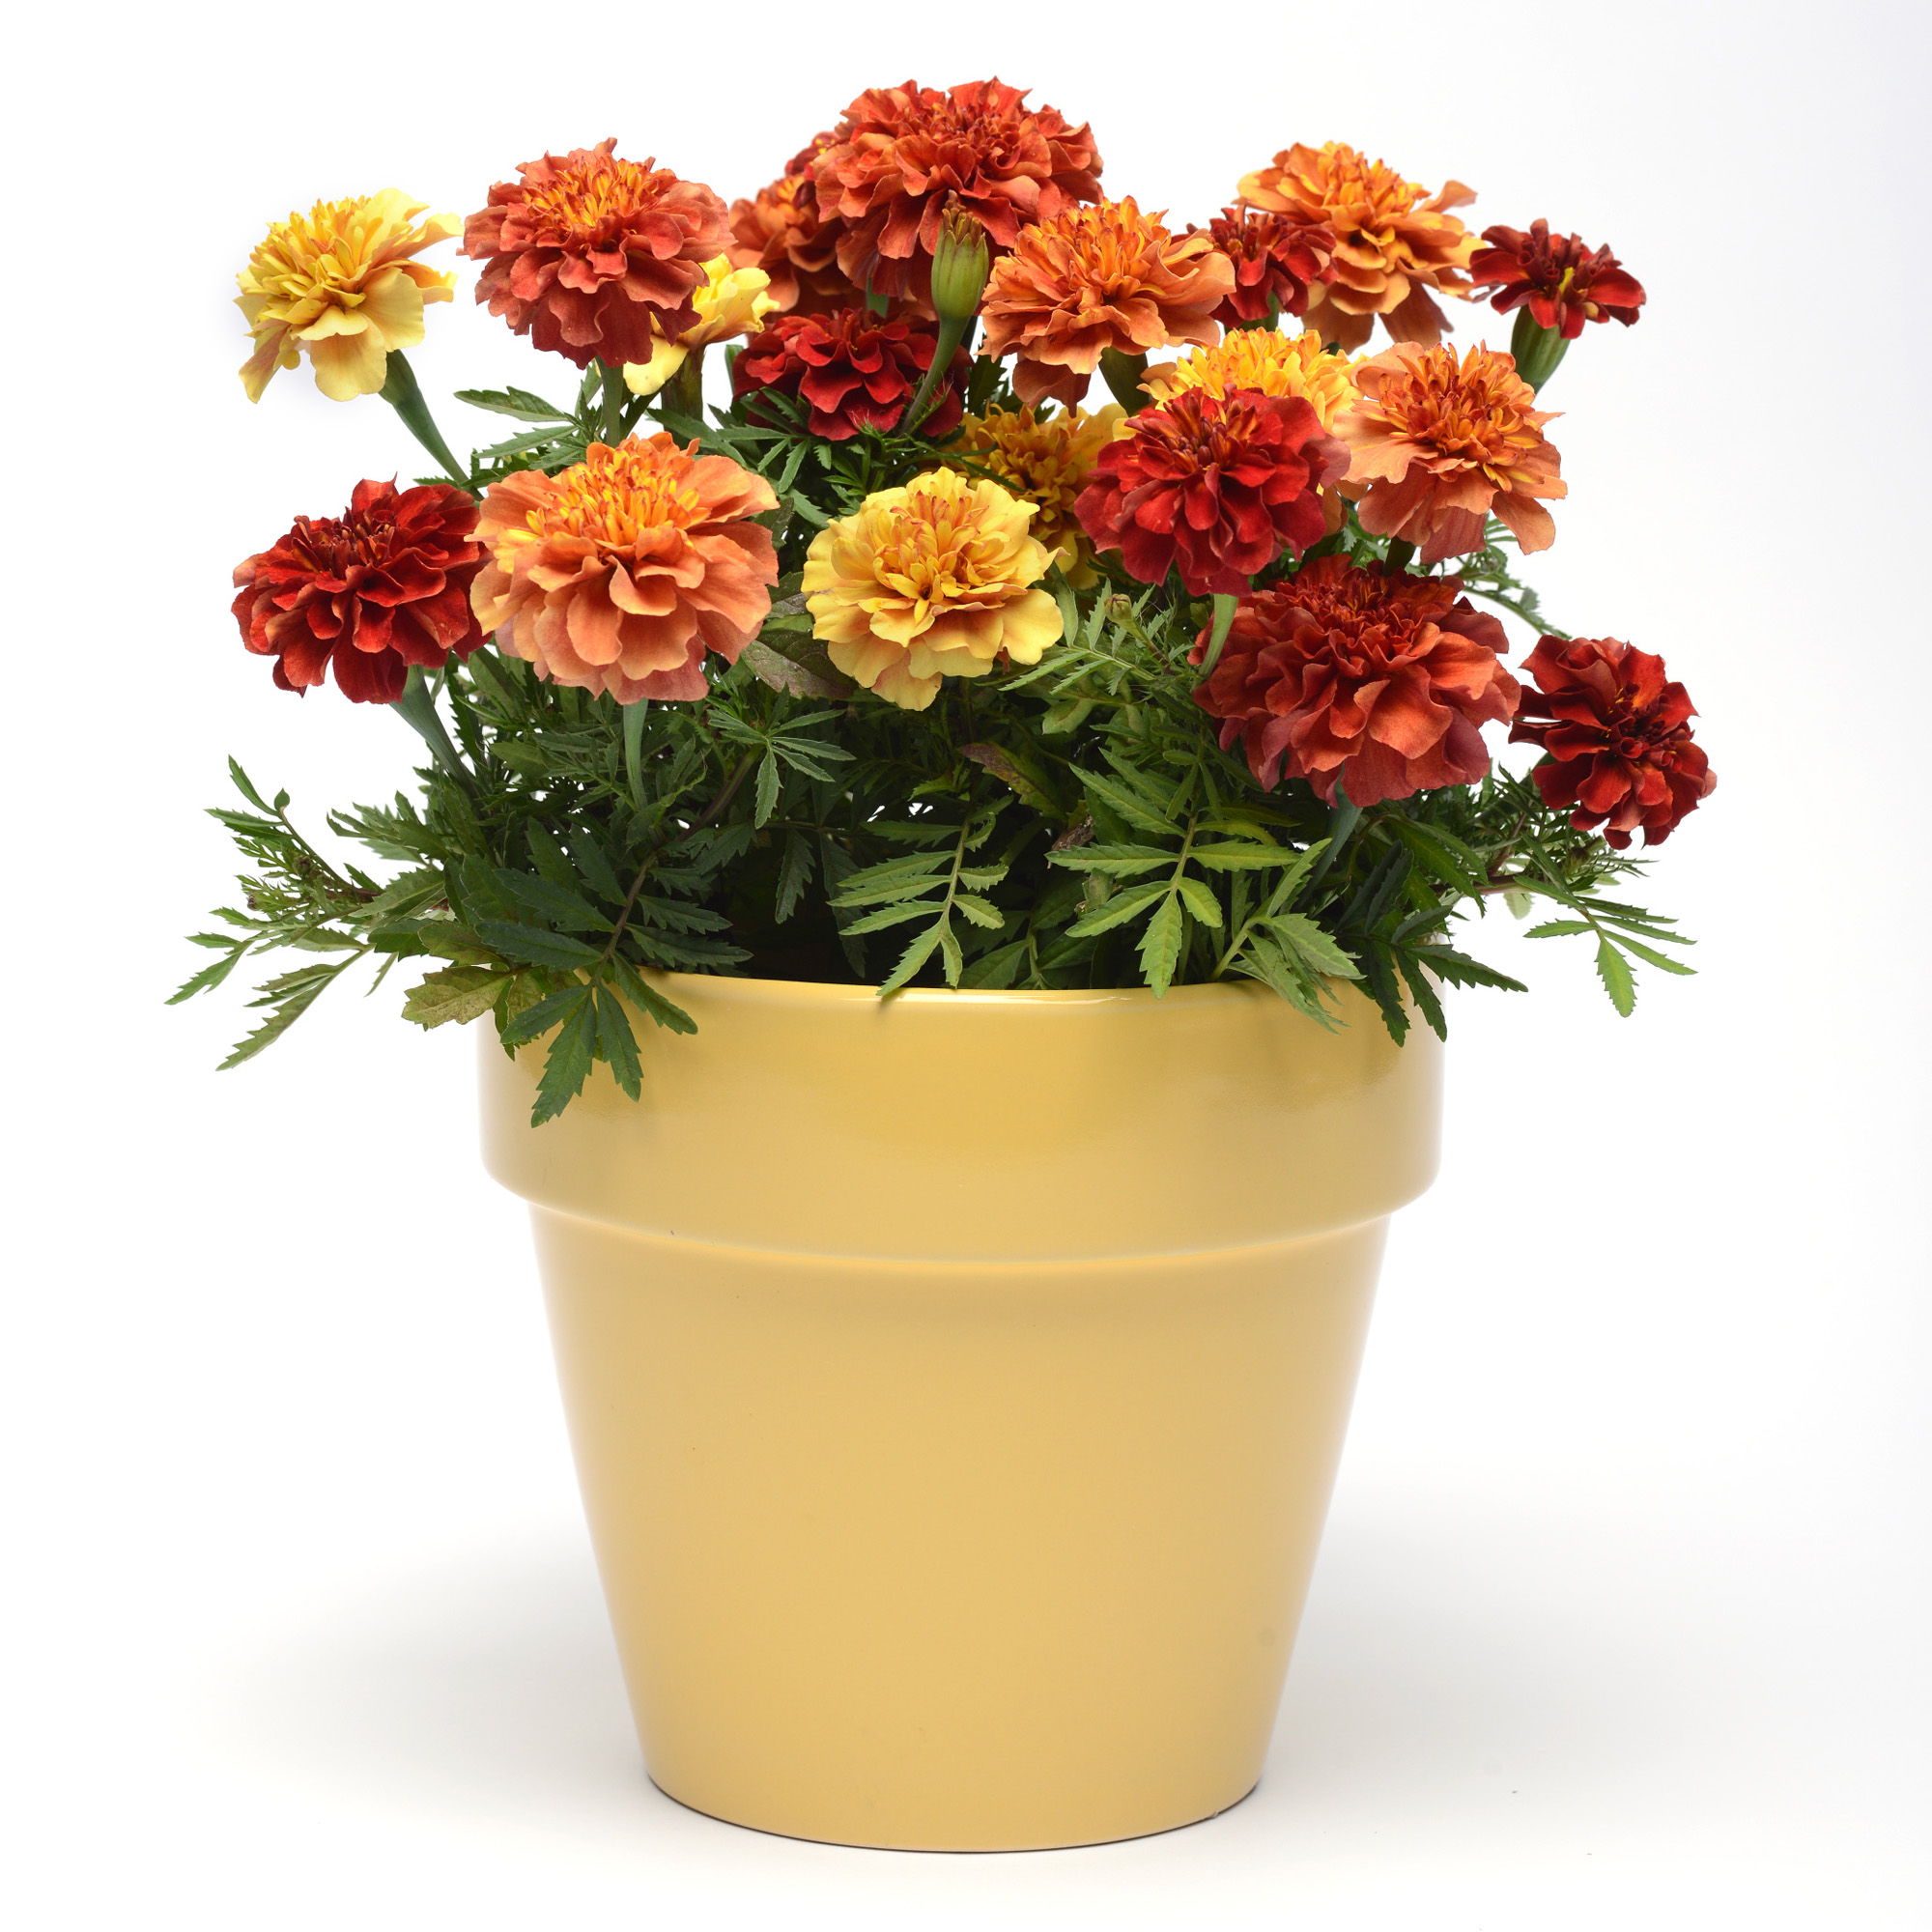 French Marigold Seeds - Strawberry Blonde.